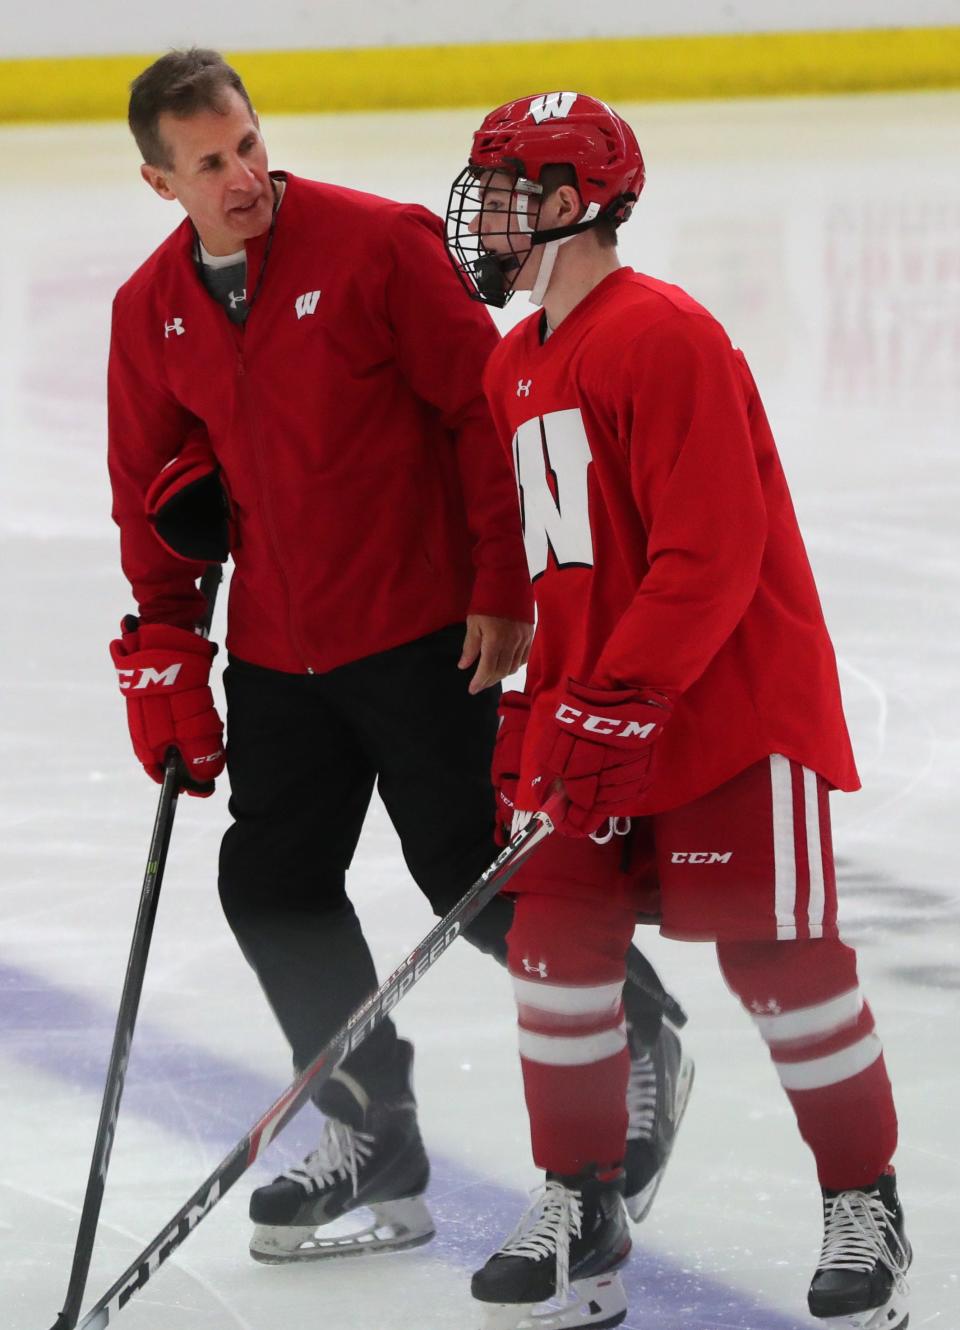 Wisconsin men's hockey coach Tony Granato talks with forward Cole Caufield (8) during practice Tuesday, October 8, 2019 at LaBahn Arena in Madison, Wis. Caufield was the Hobey Baker Award winner that season.